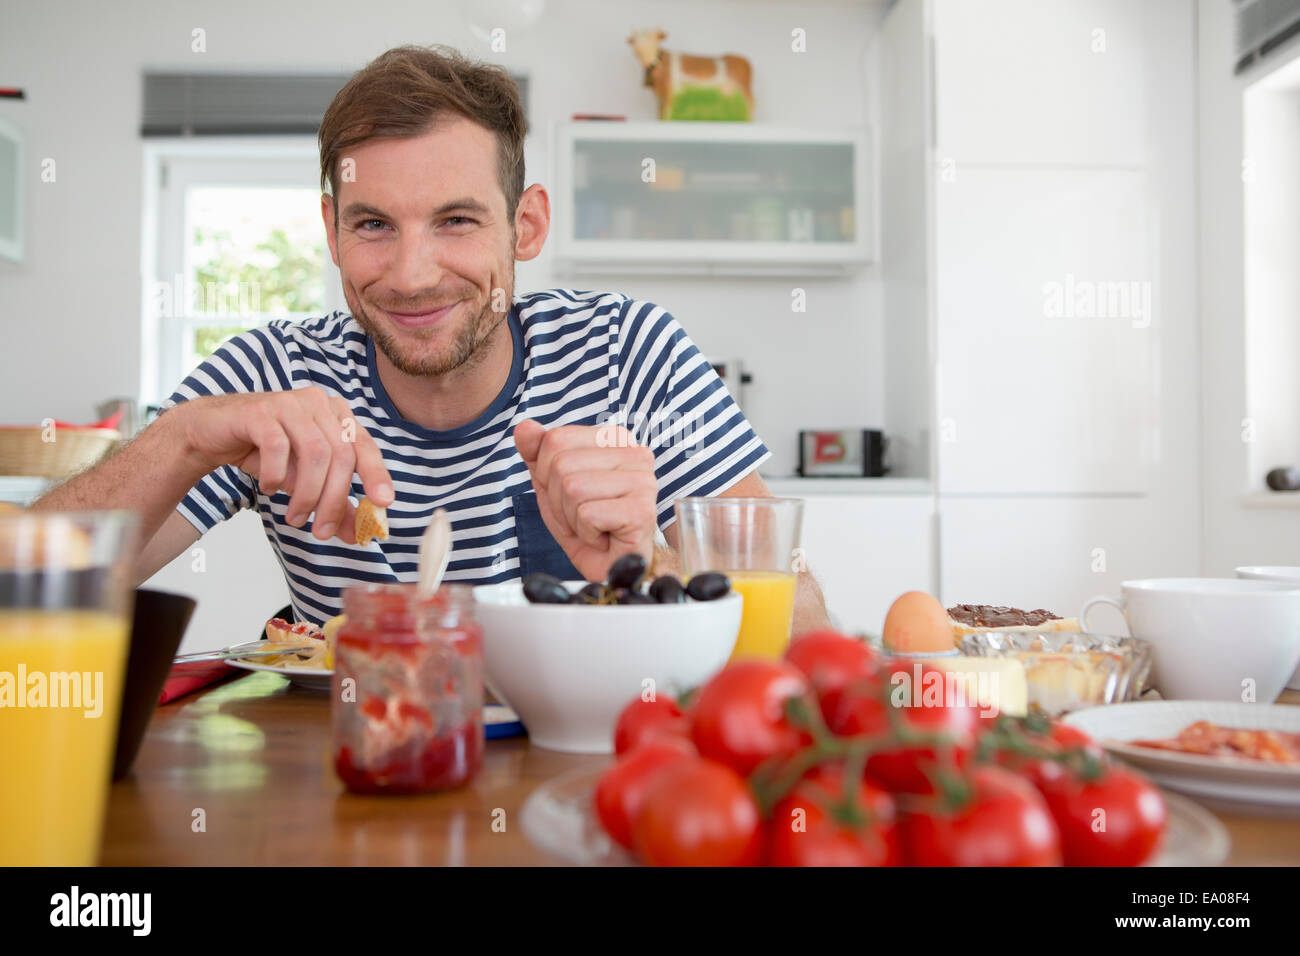 Mid adult man eating at kitchen table Stock Photo